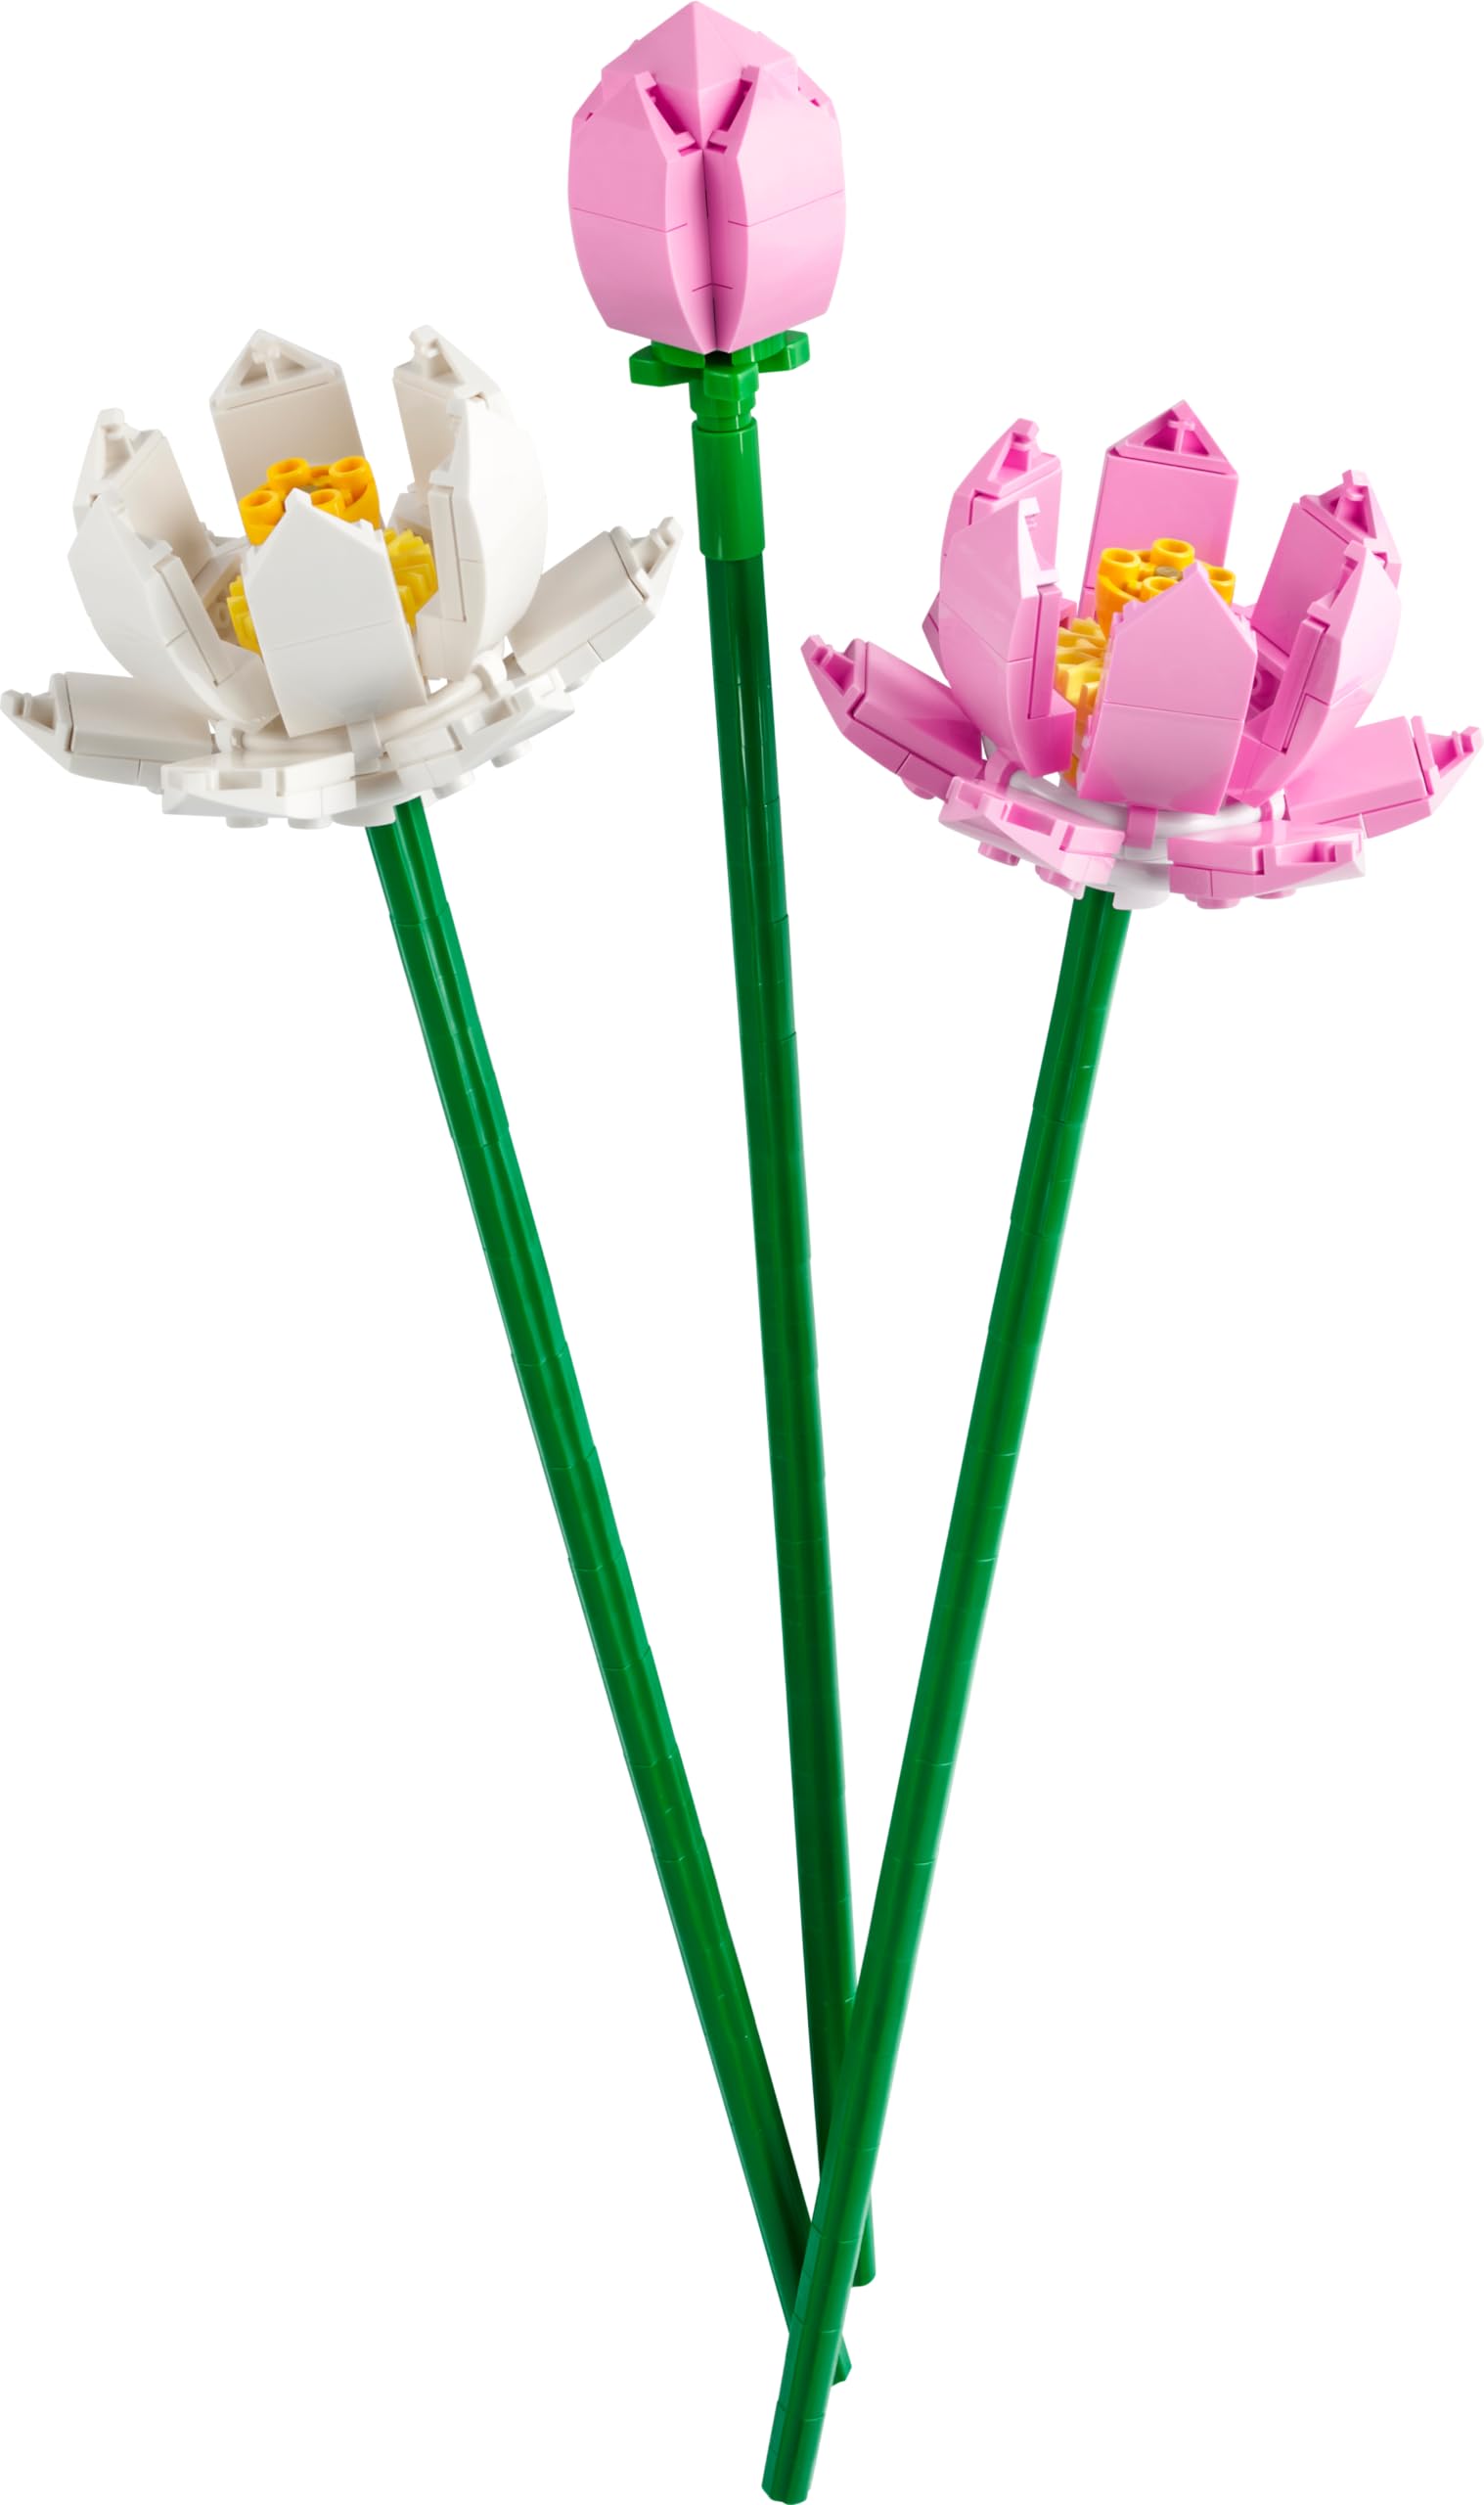 LEGO Lotus Flowers Building Kit, Artificial Flowers for Decoration, Gift Idea, Aesthetic Room Décor for Kids, Building Toy for Girls and Boys Ages 8 and Up, 40647